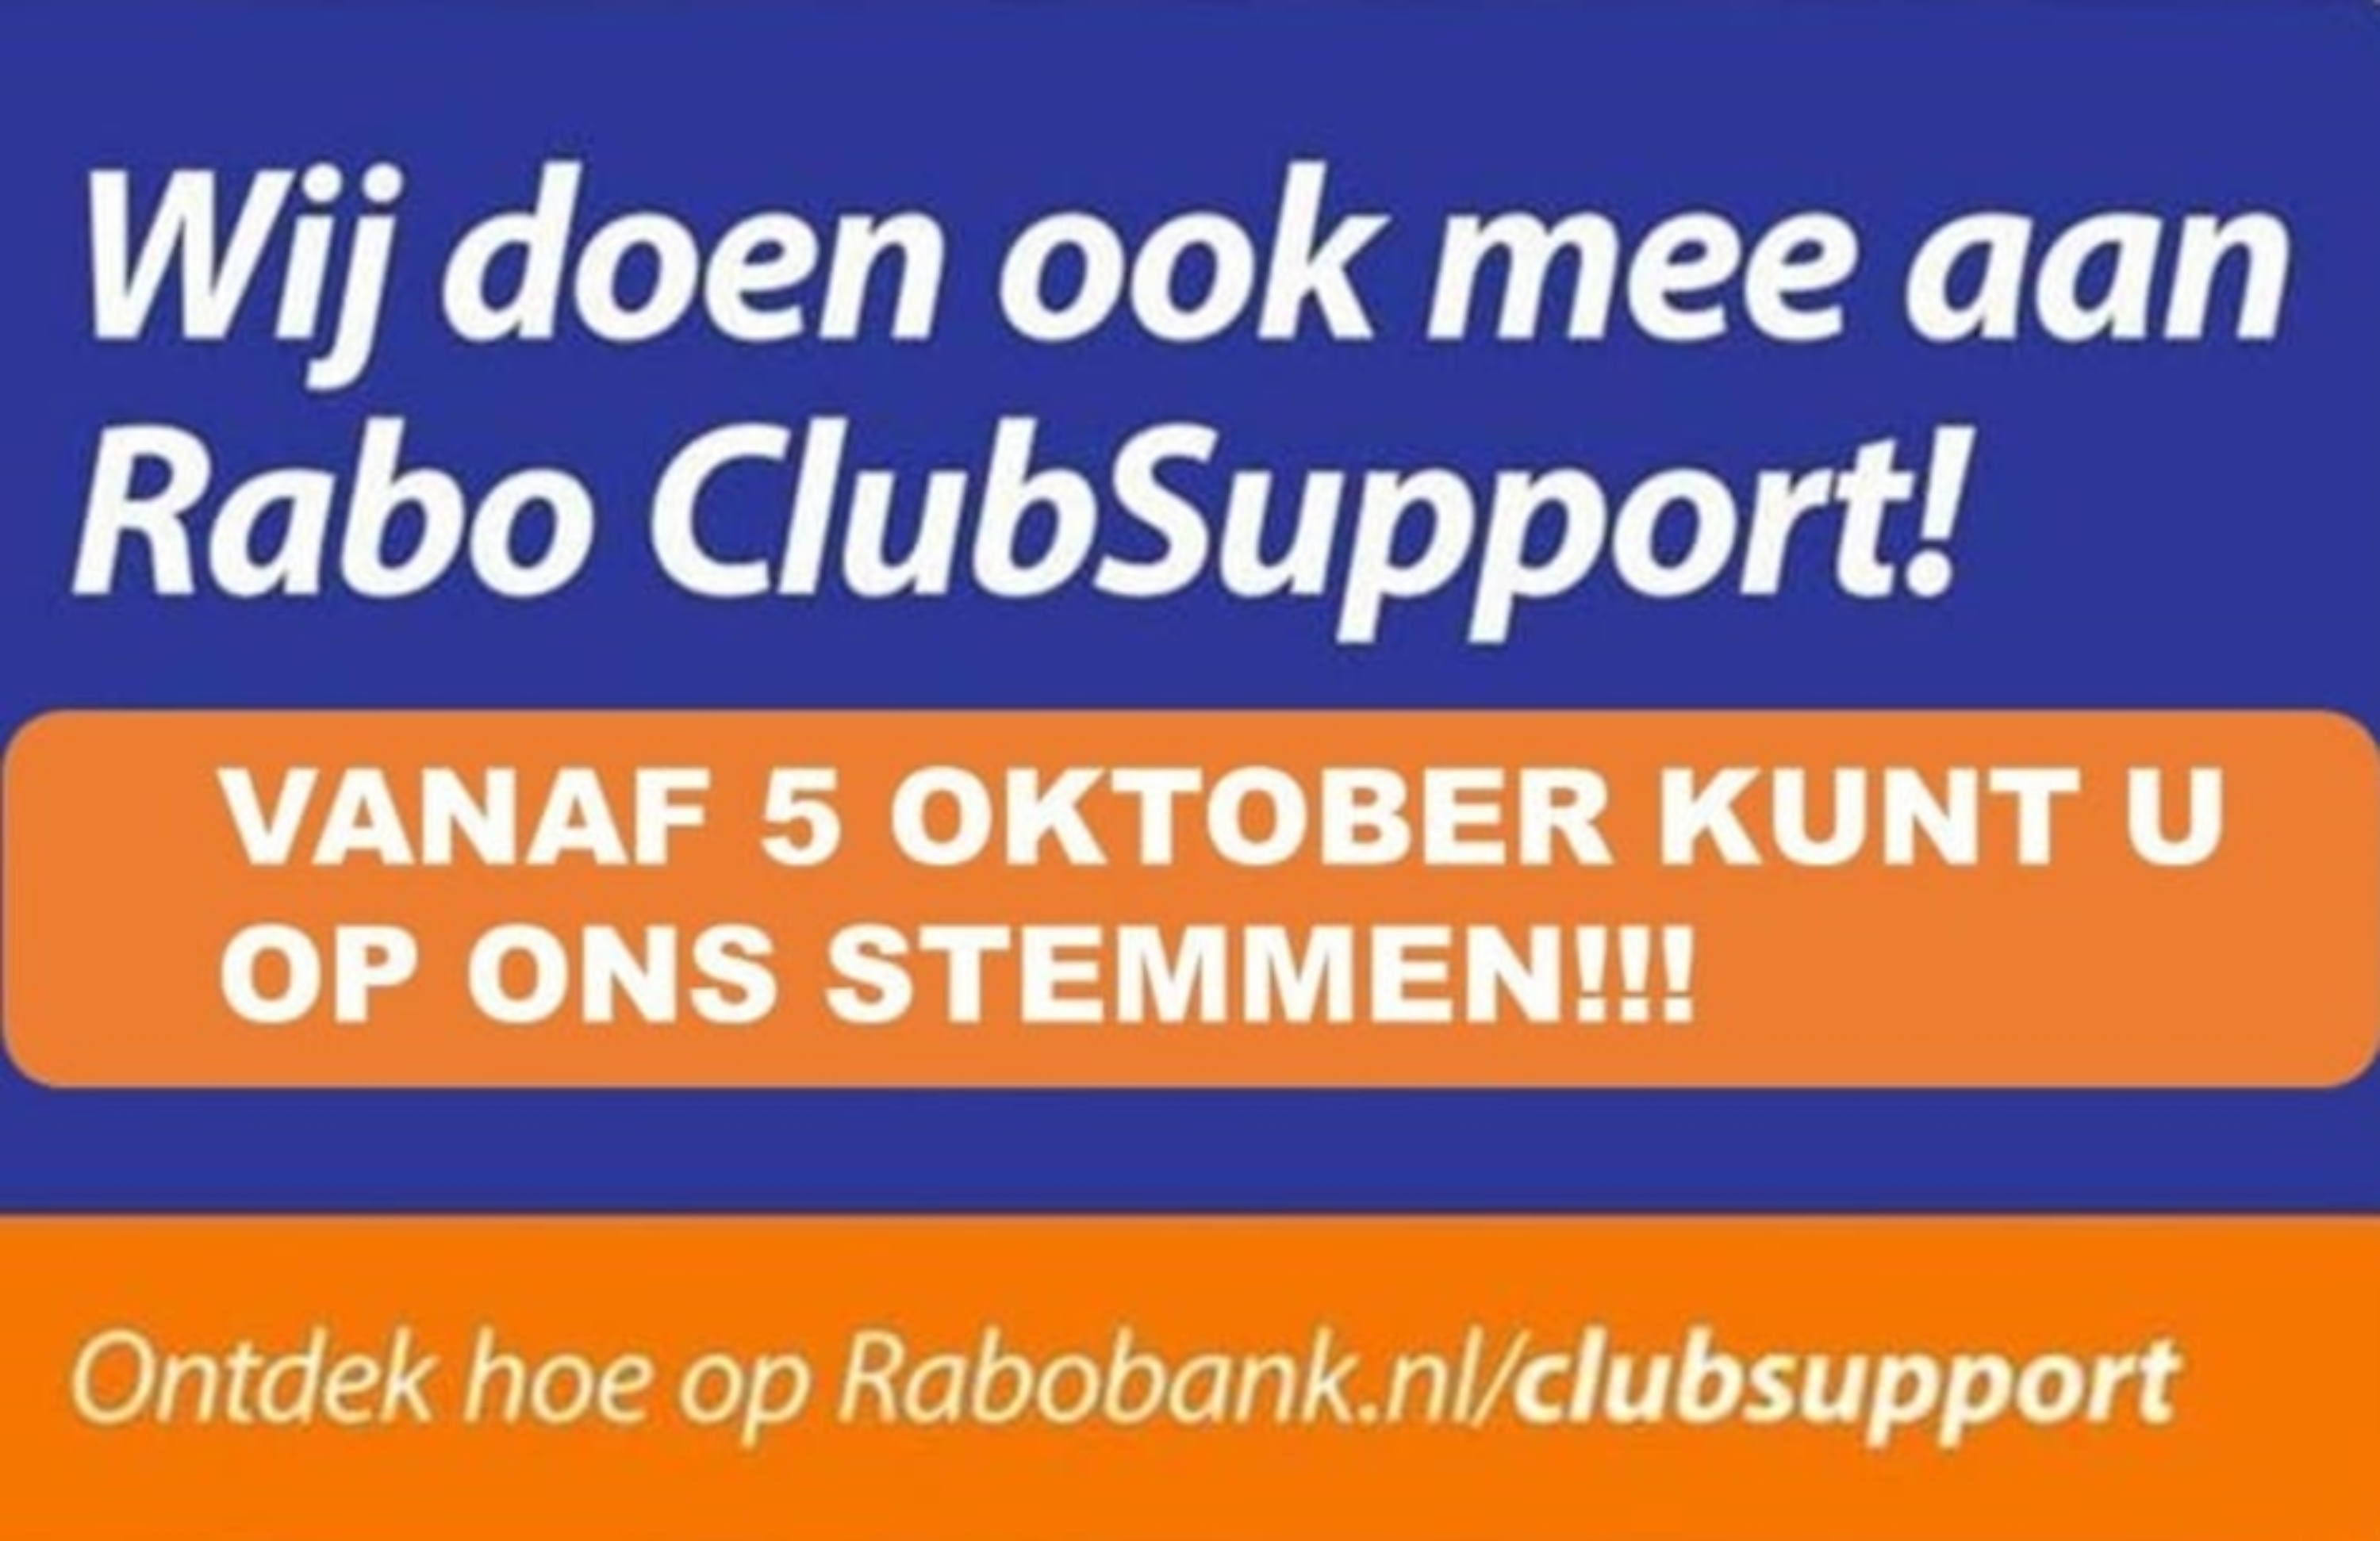 Rao Club Support